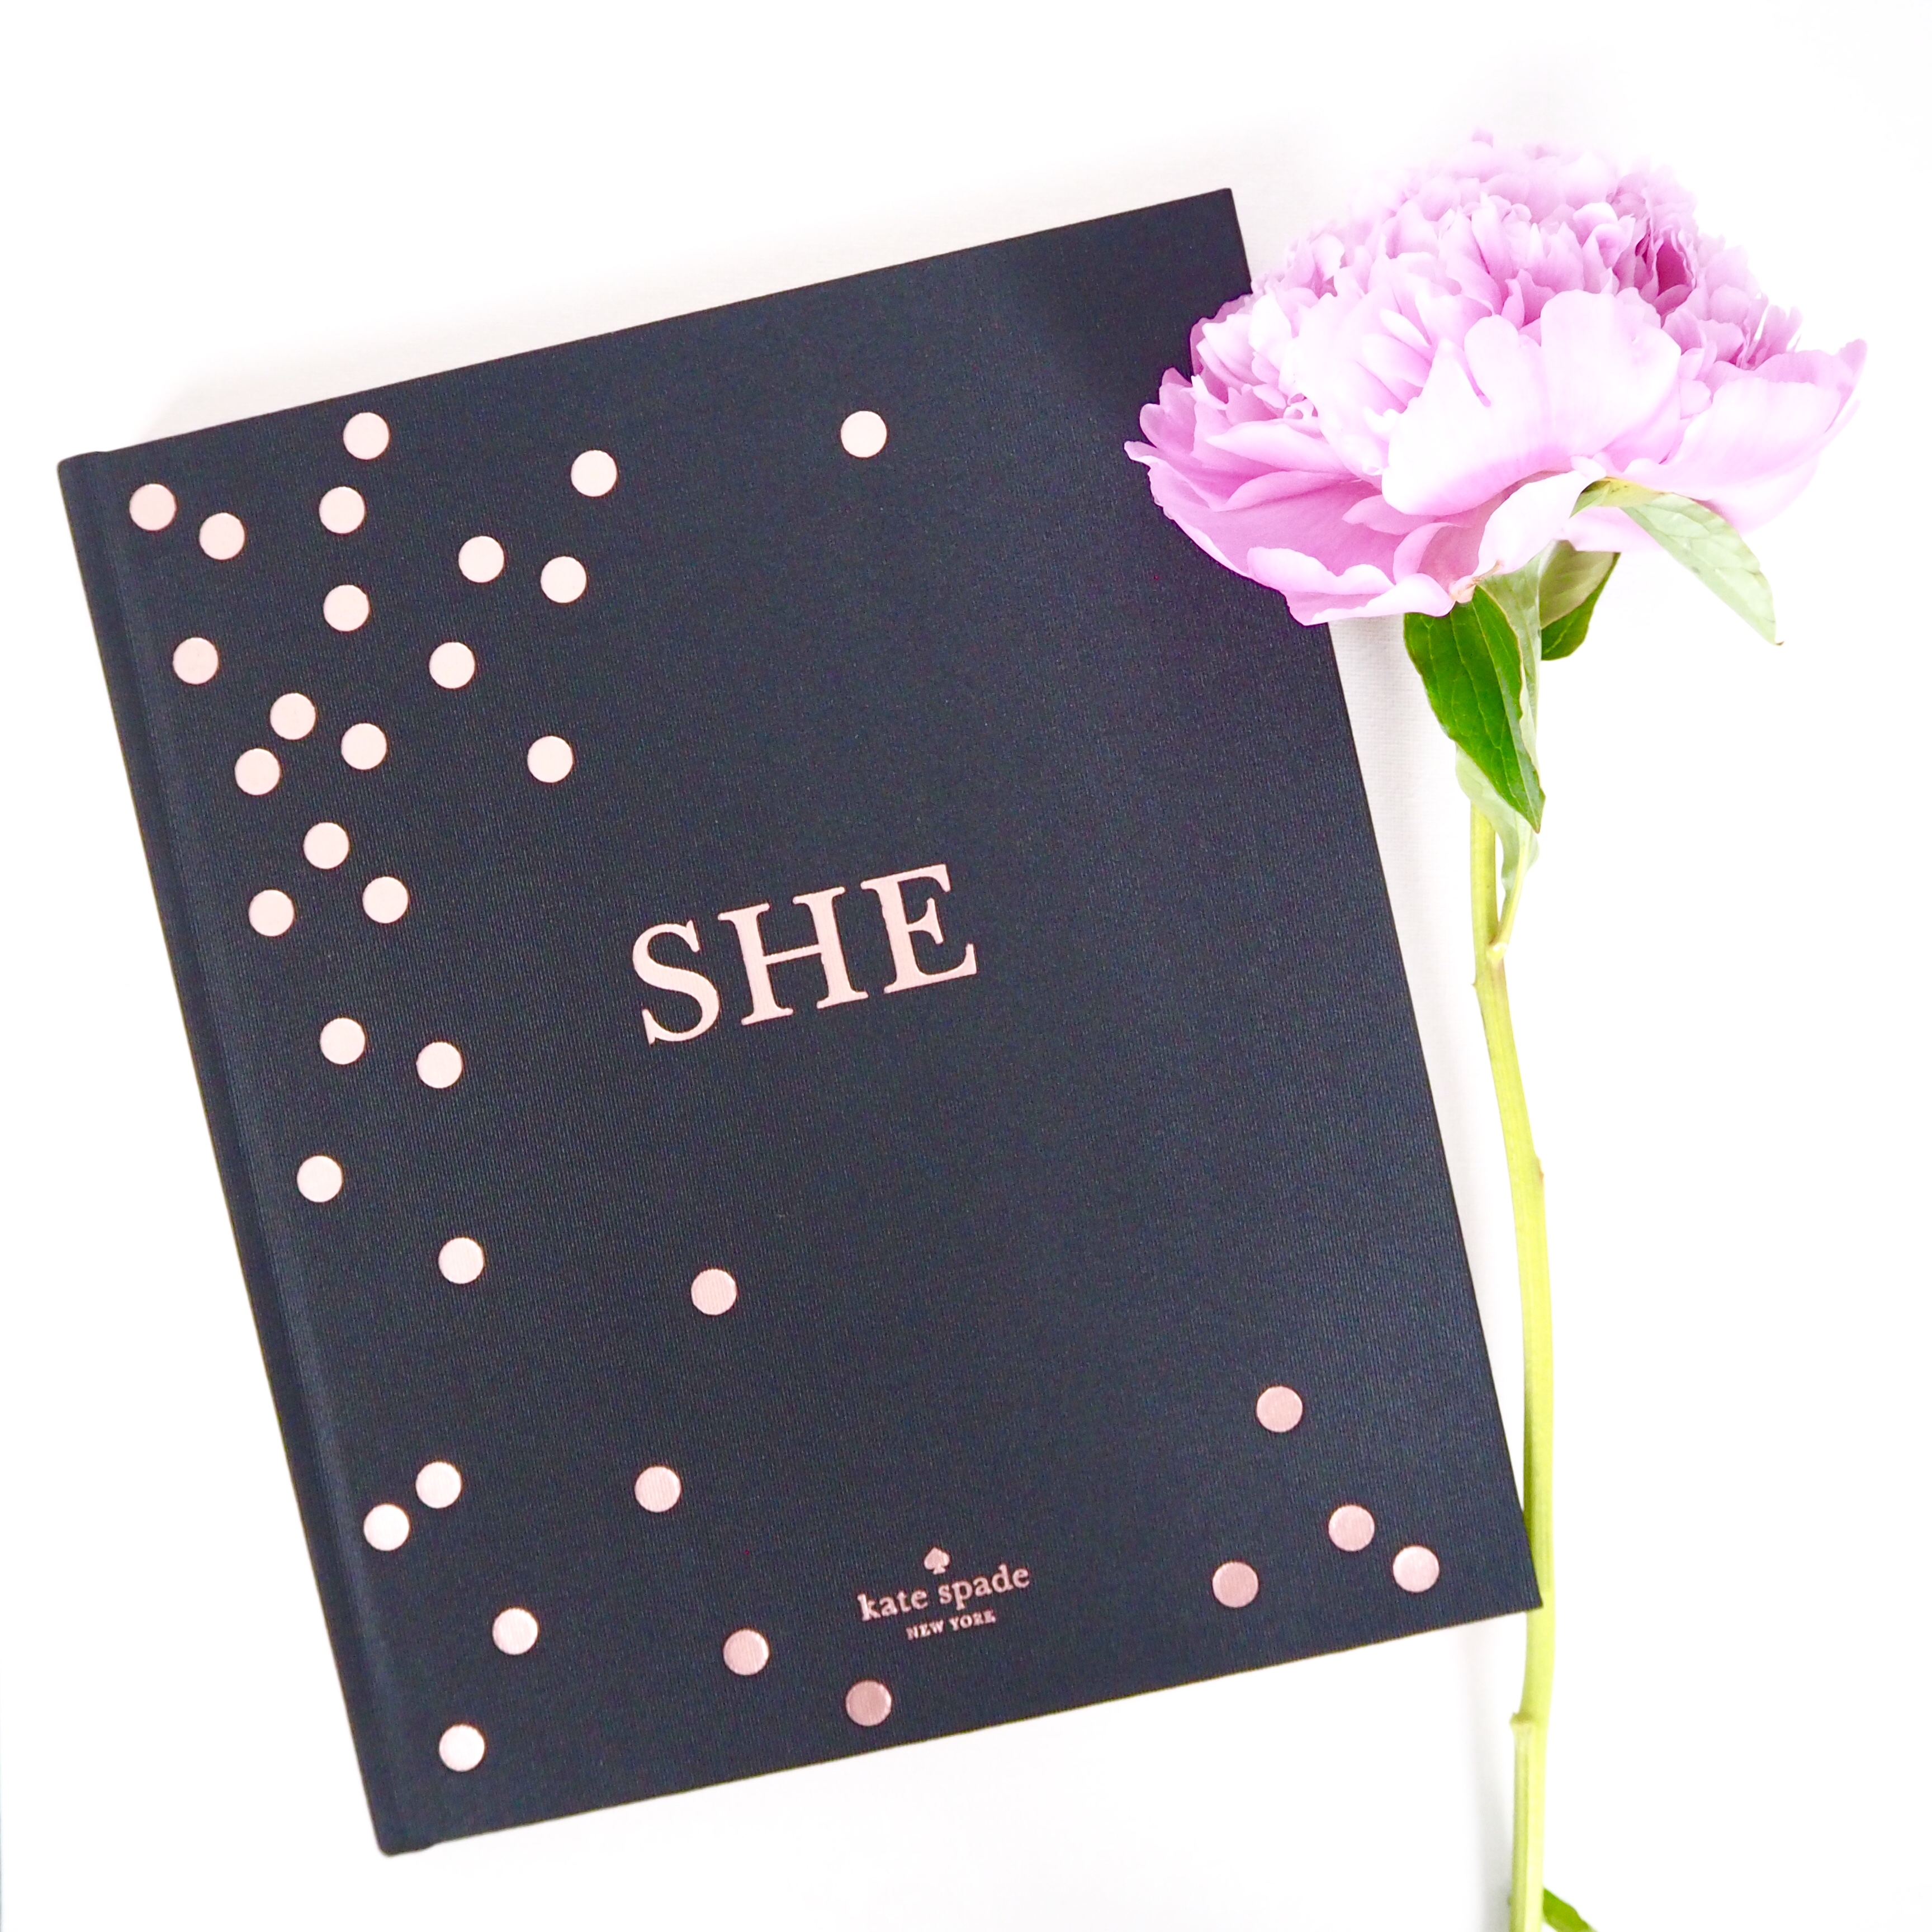 SHE by kate spade new york